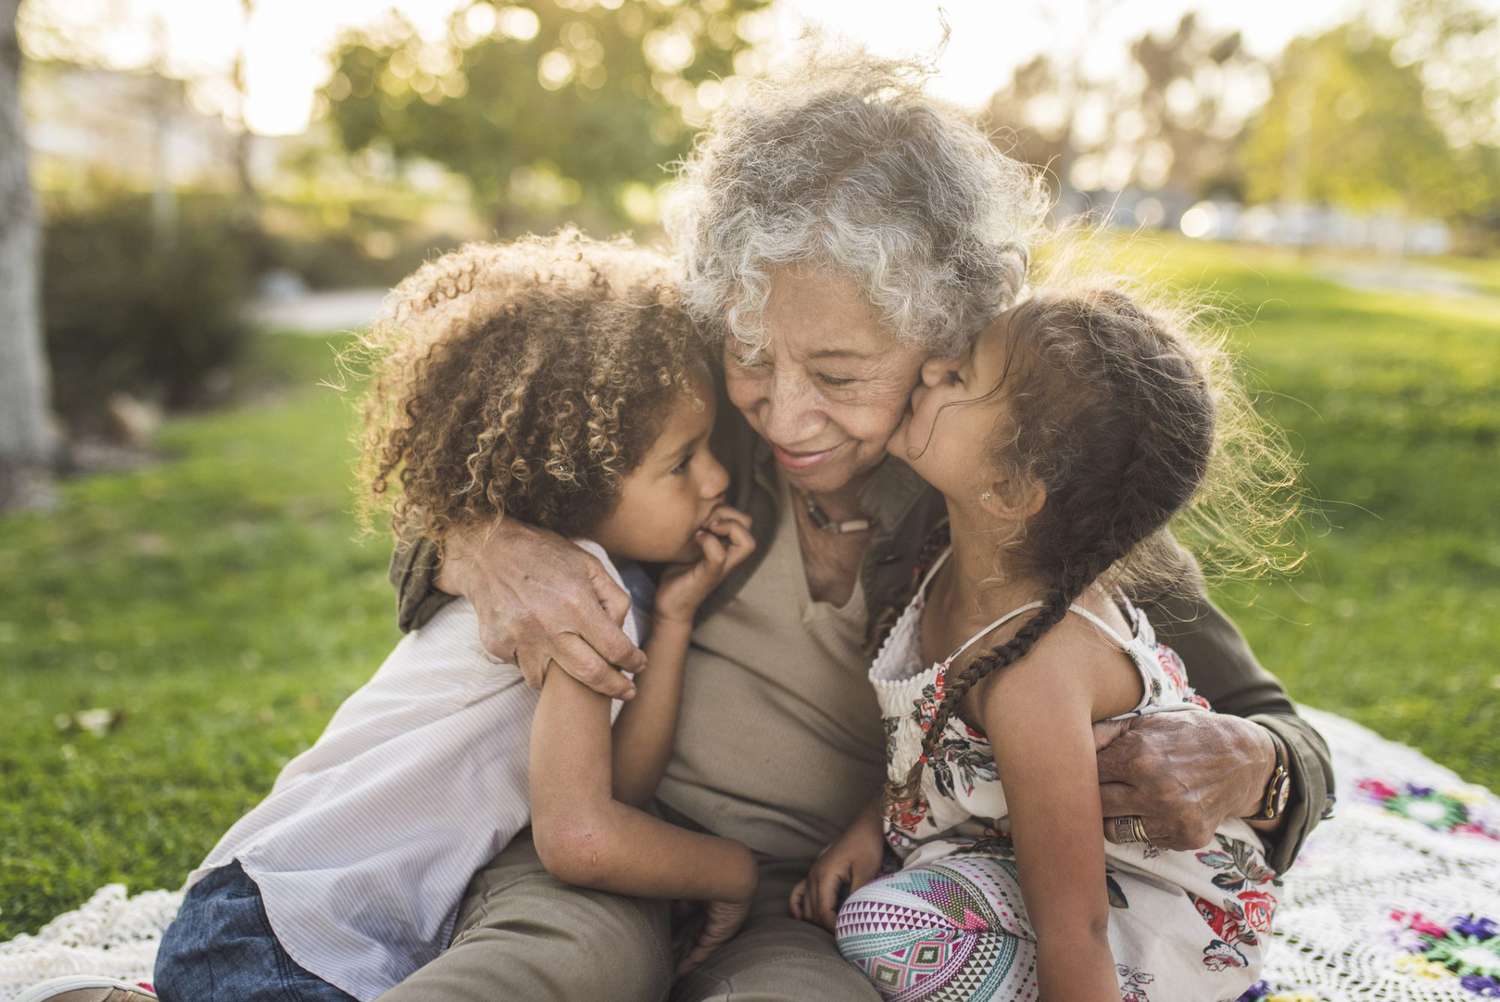 An image of grandchildren with their grandmother on a picnic blanket at a park.